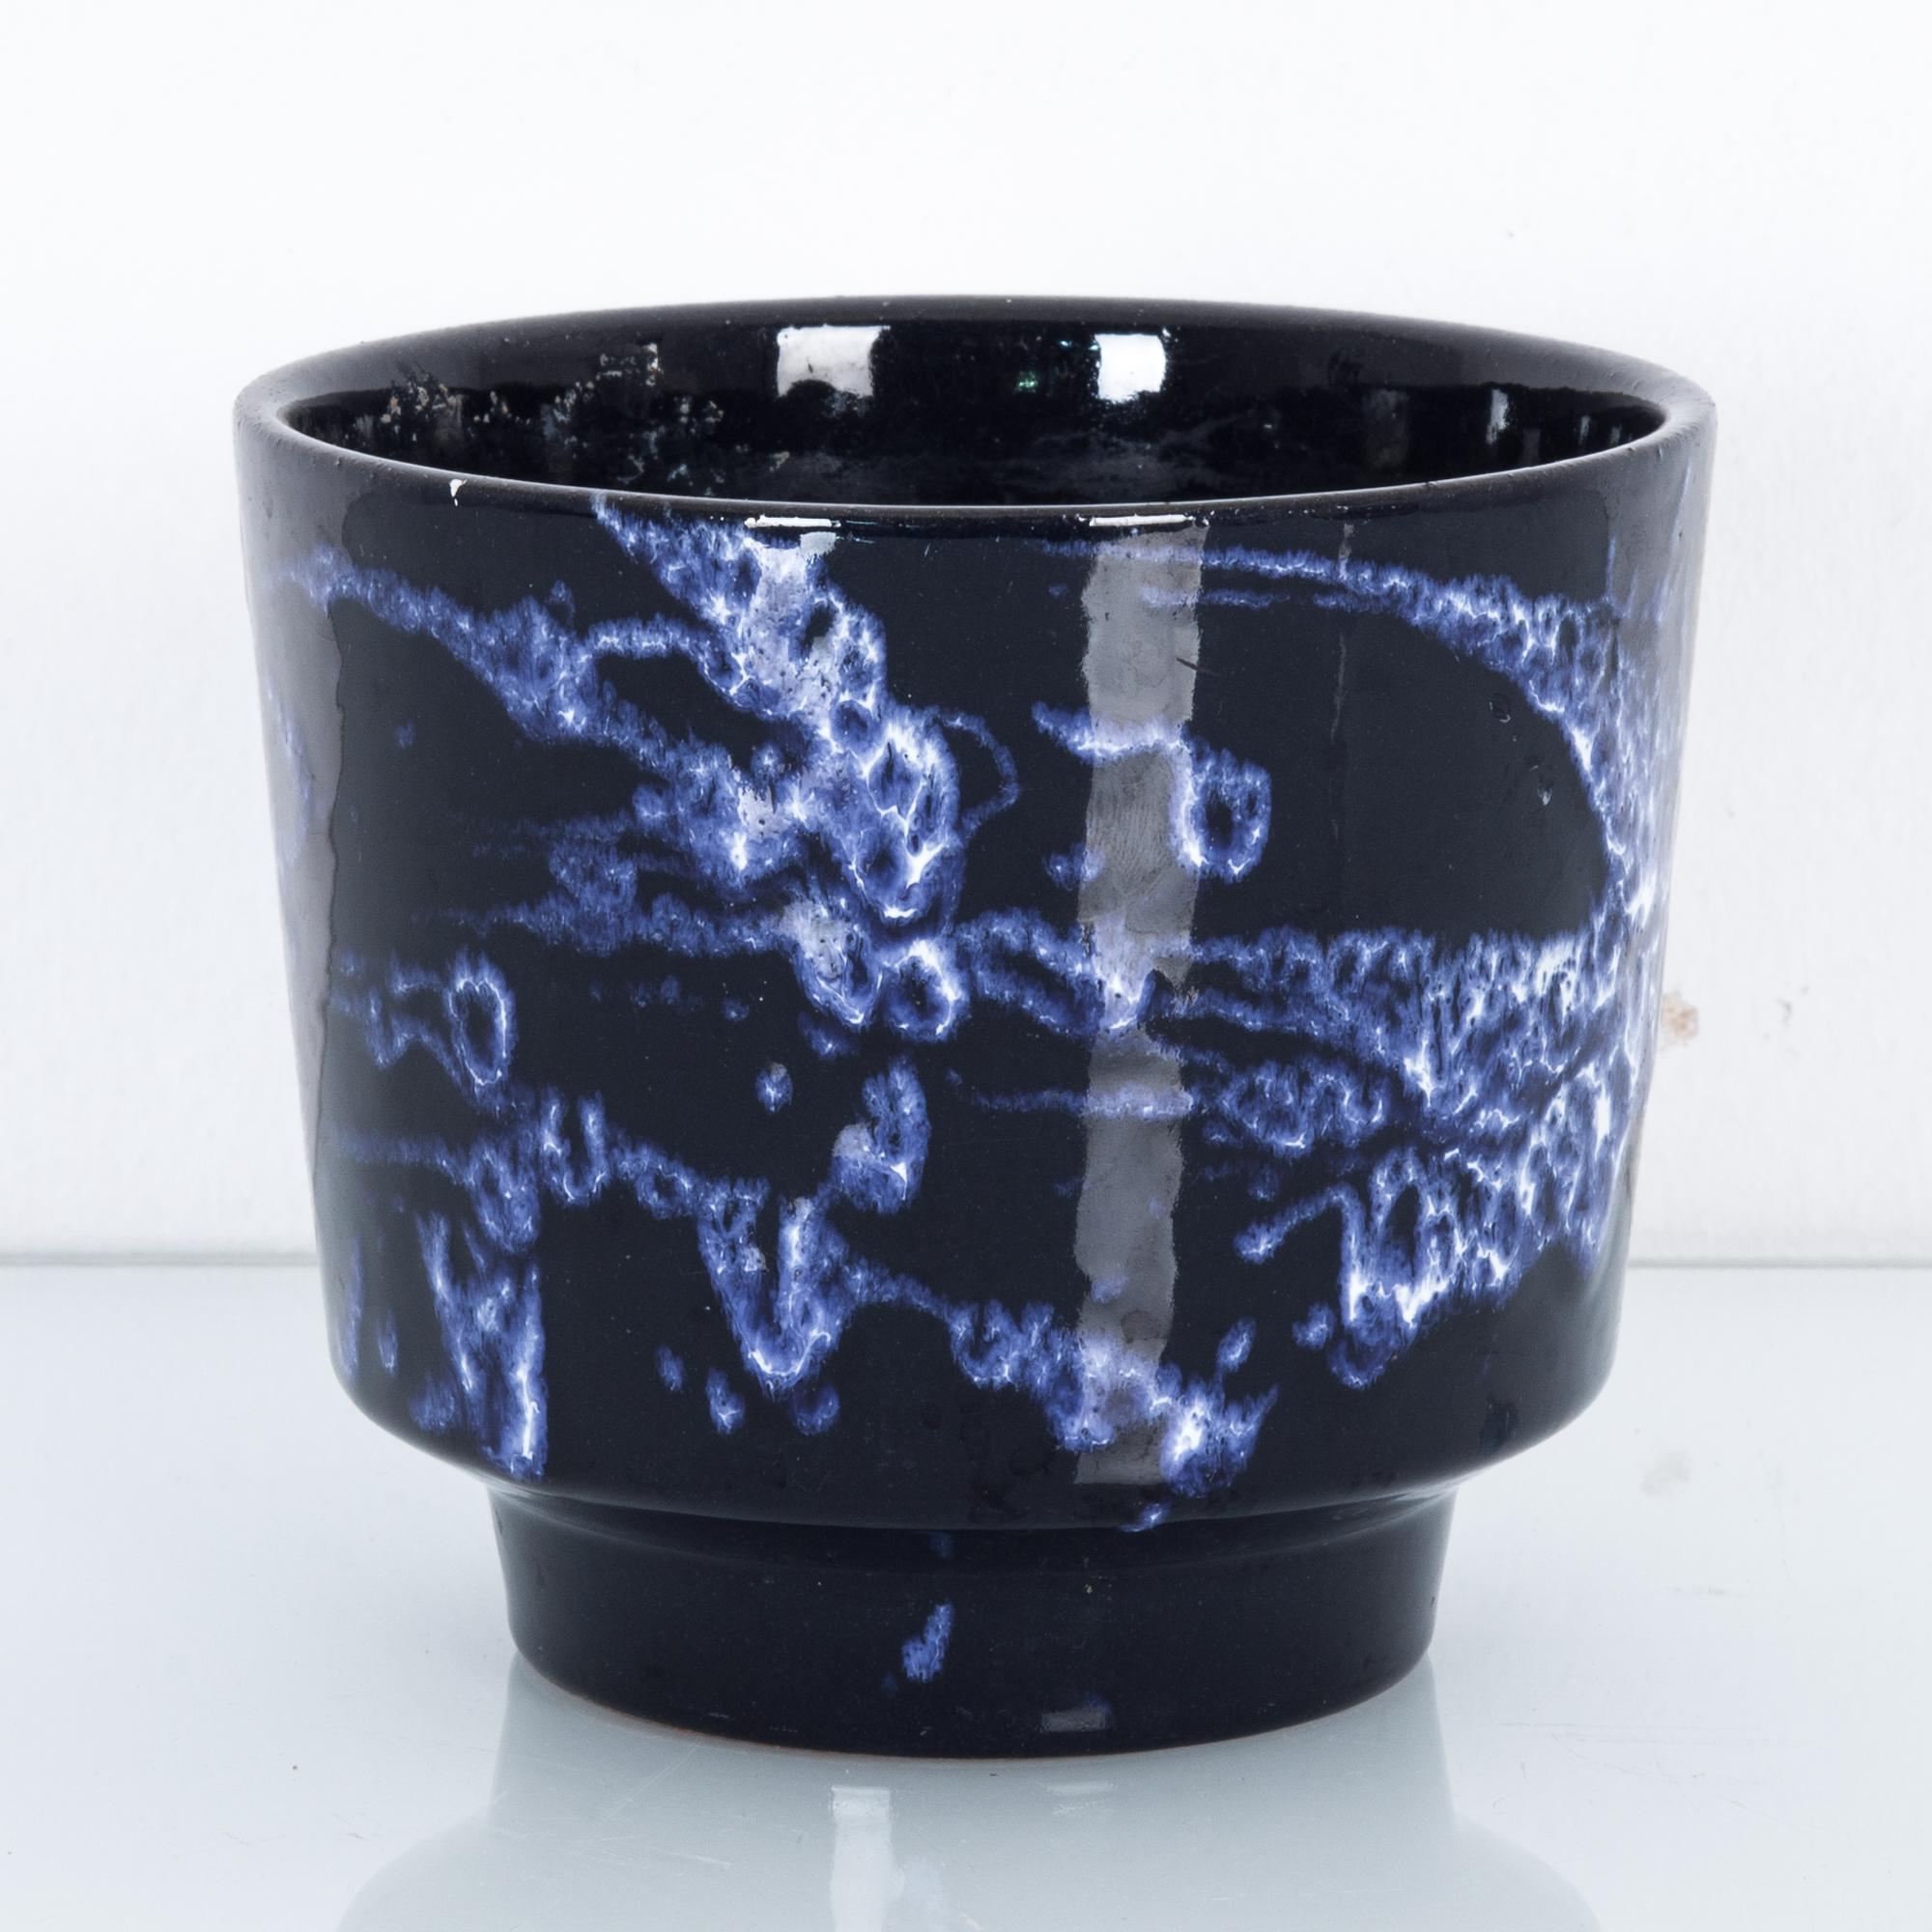 A ceramic vase from Germany, circa 1960. An open cup shape with a deep obsidian glaze. A current of indigo tendrils swirls over the black surface, an abstract pattern suggestive of night skies, nebulae or the mysteries of the deep sea. A modern and